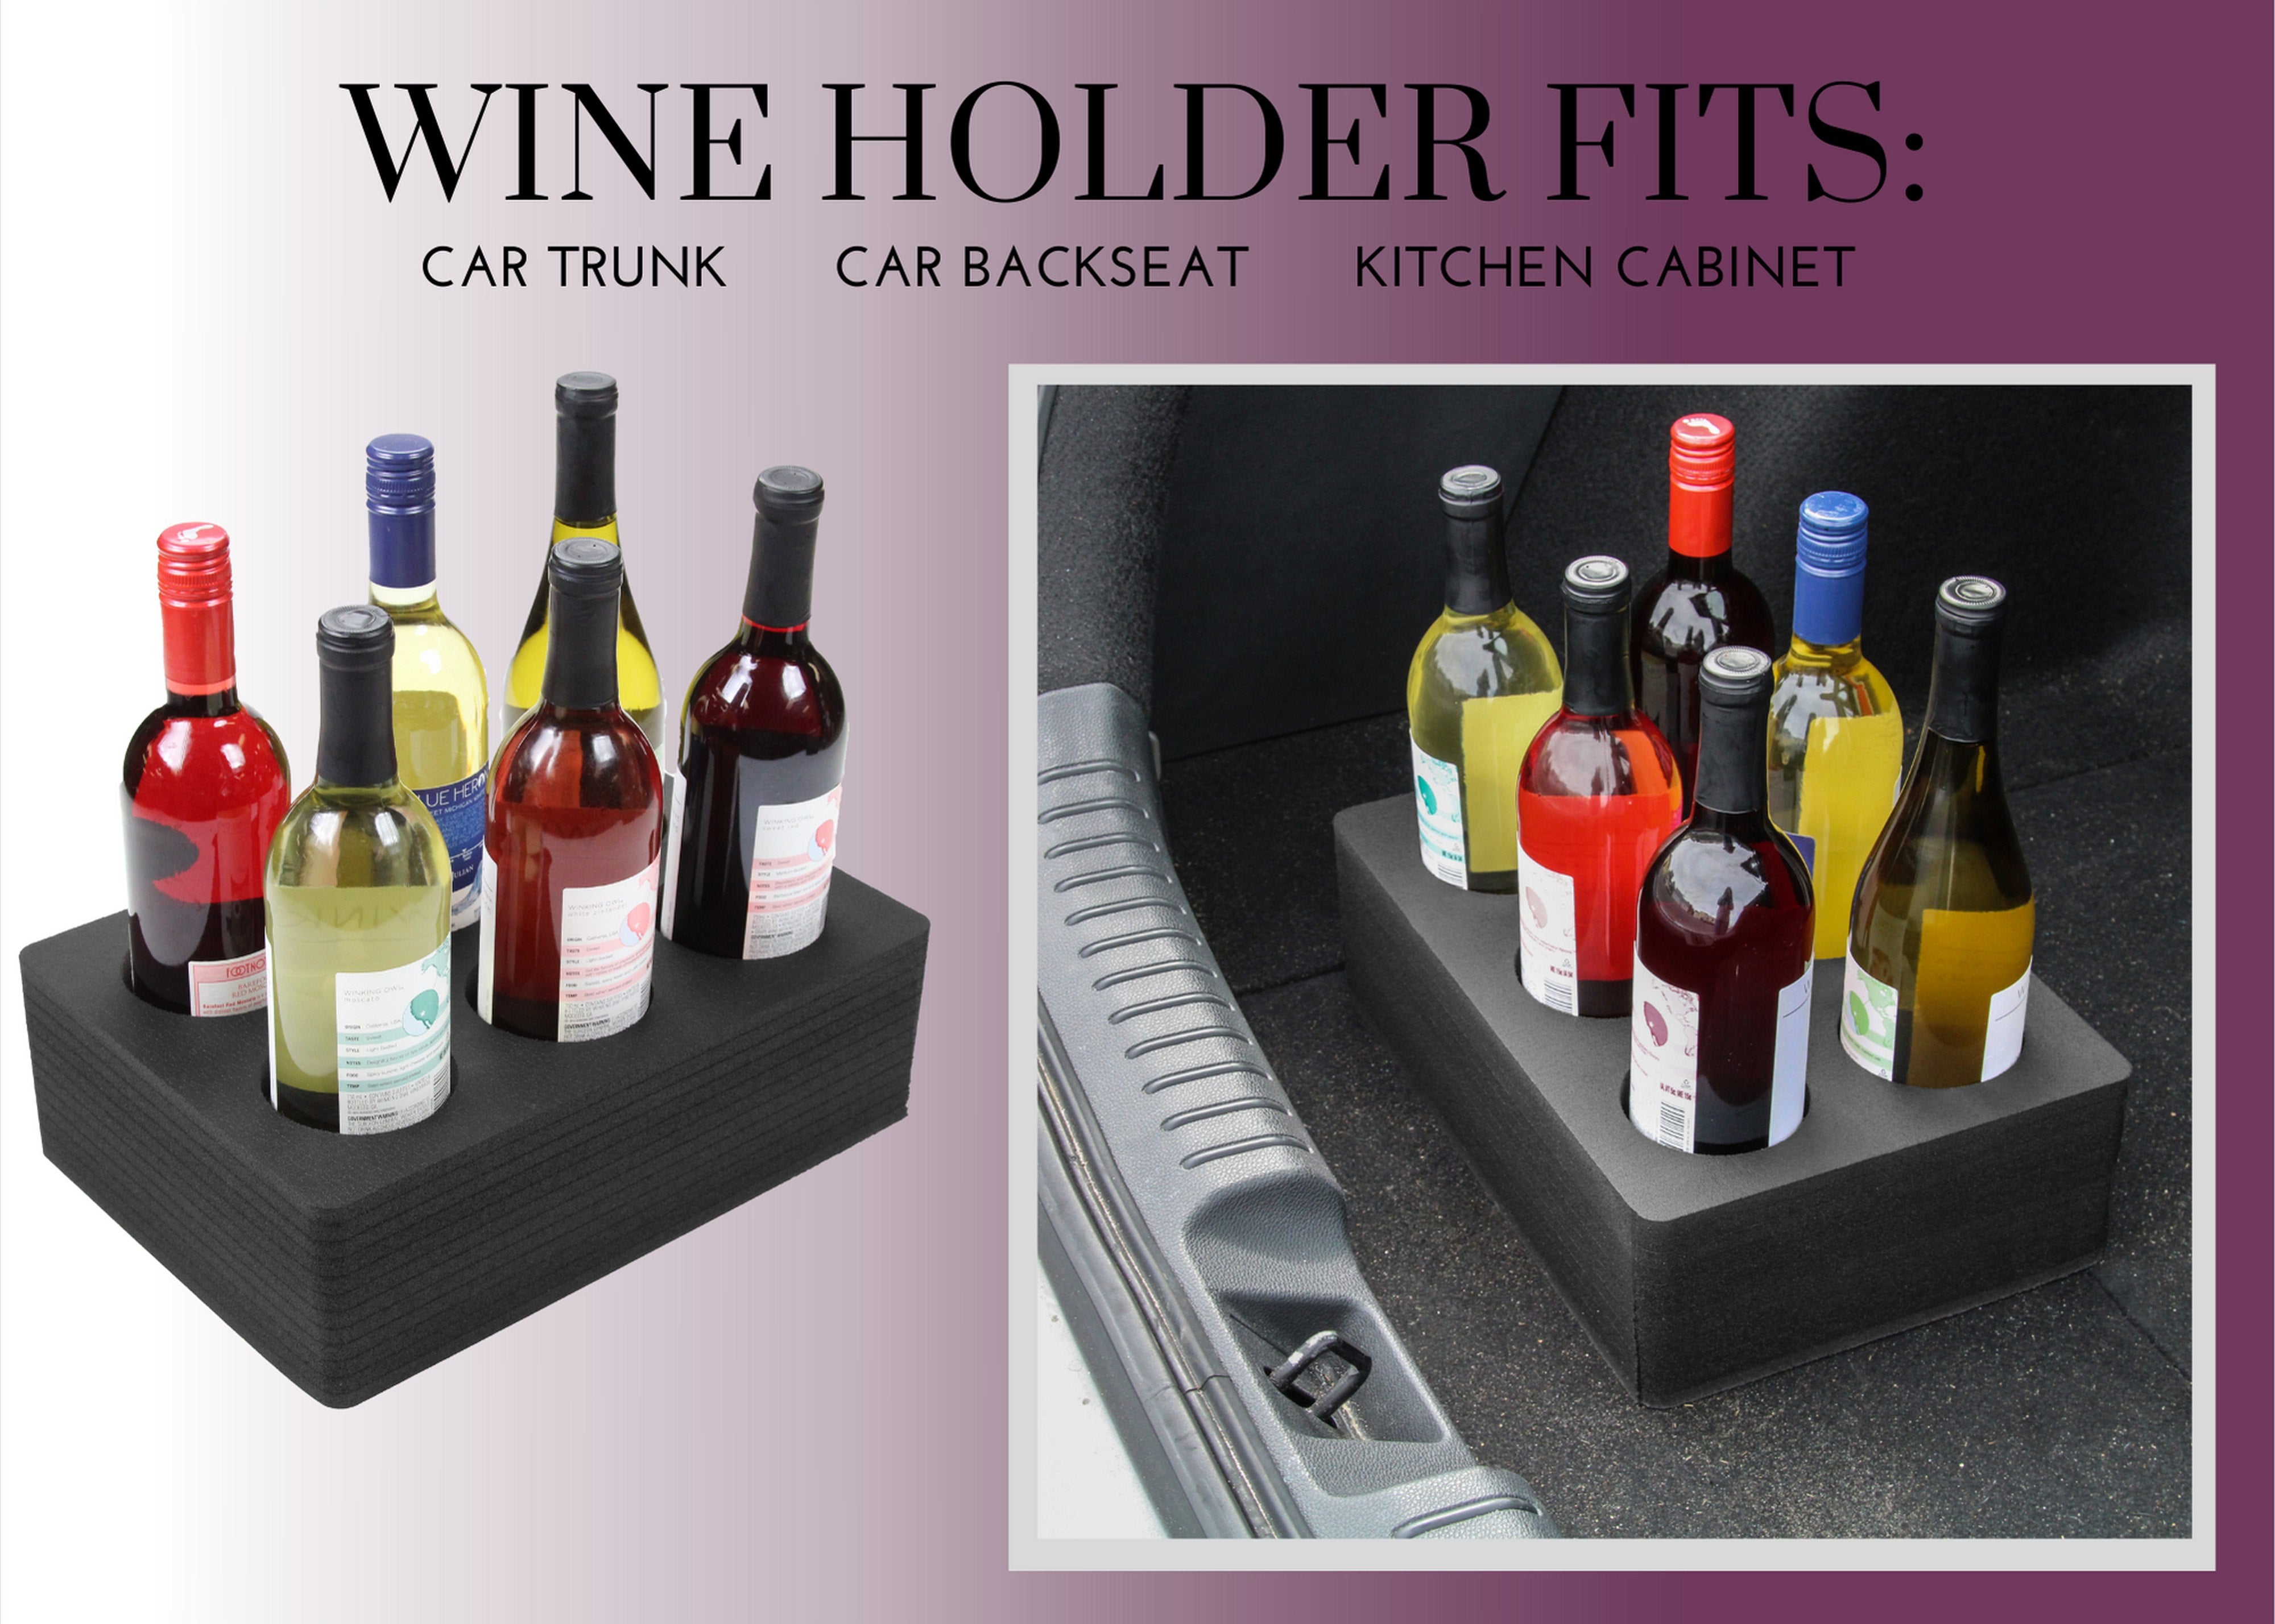 Wine Holder Durable Foam Organizer Transport Protector Packer Bottle Car Truck SUV Van Seat Travel Protection 13.75 x 9.5 x 4 Inches Holds 6 Bottles